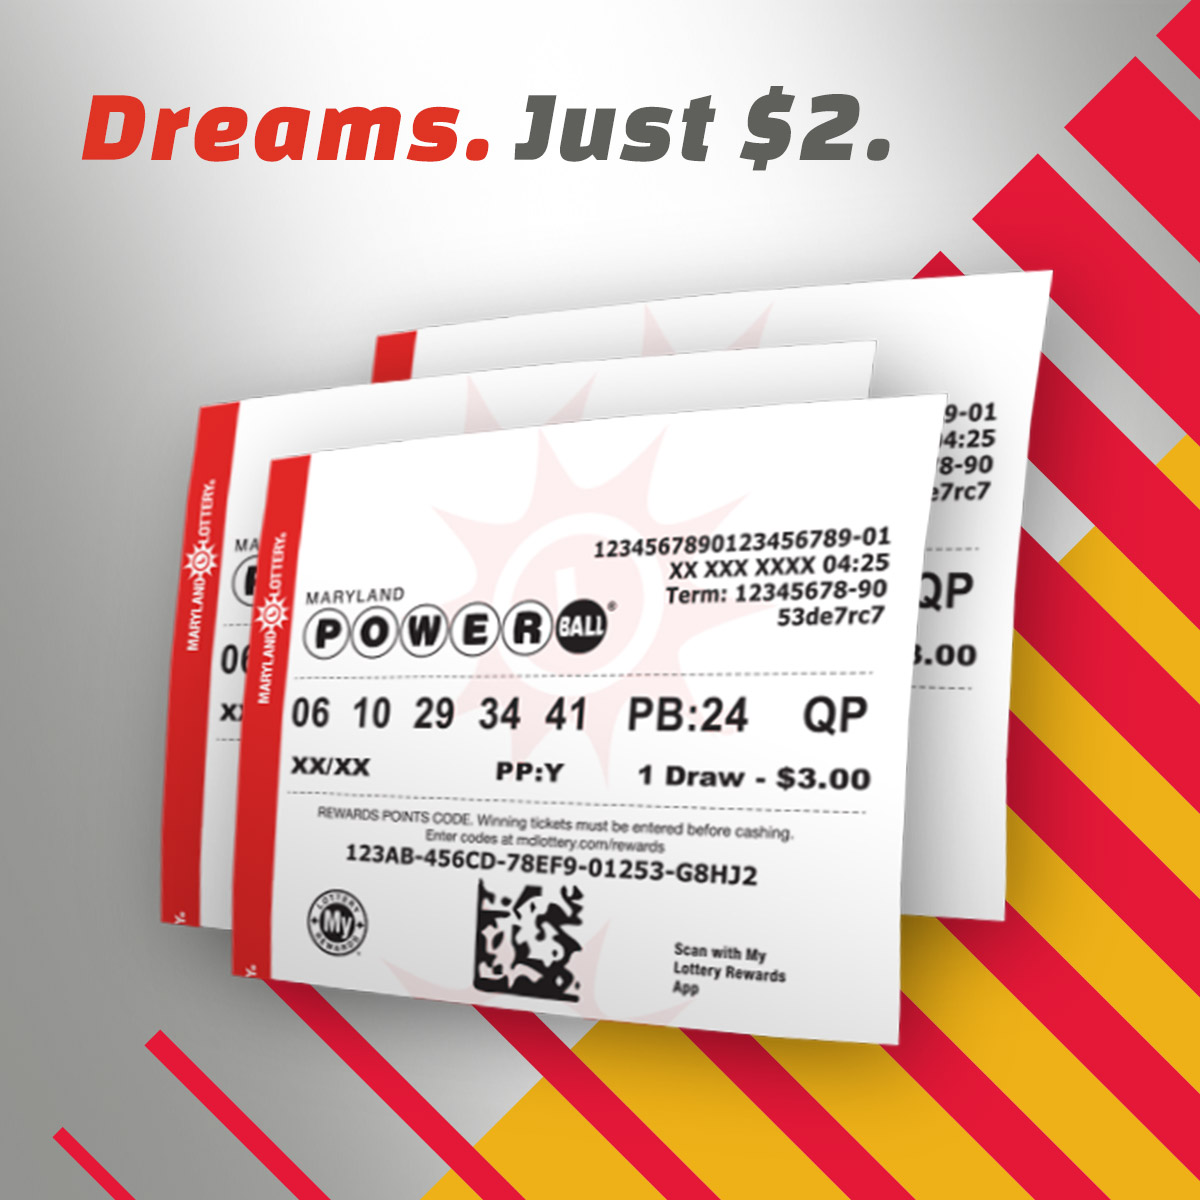 Congratulations to the newest Maryland millionaire! A $1 million winning Powerball ticket was sold in Rockville. Read more: https://t.co/TjYaM3XLAV https://t.co/aglpUQftFz